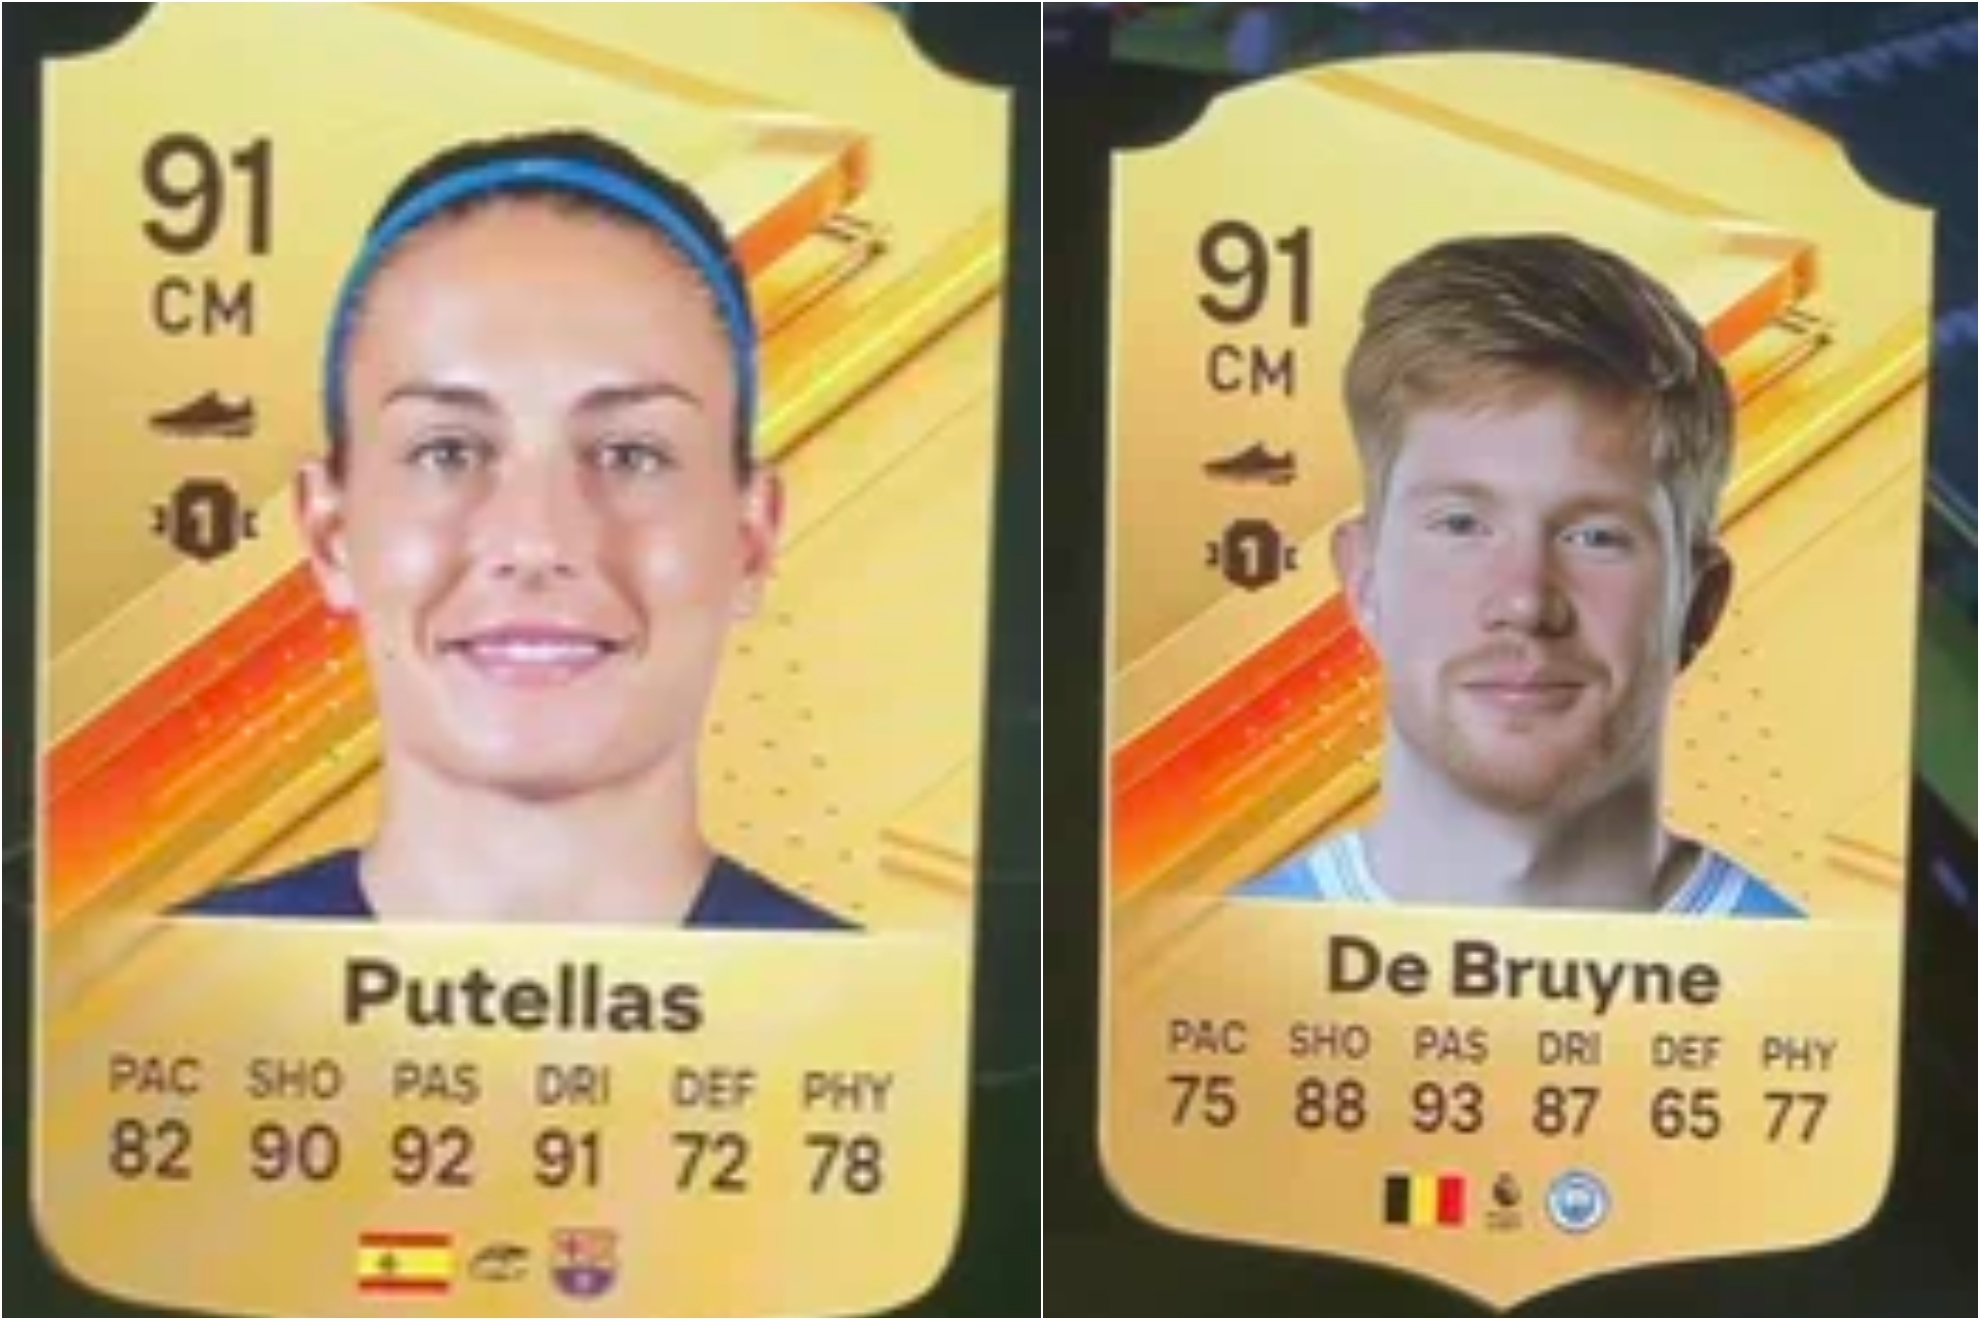 EA Sports FC 24 criticized as Ultimate Team card appears to show Putellas with same average as De Bruyne